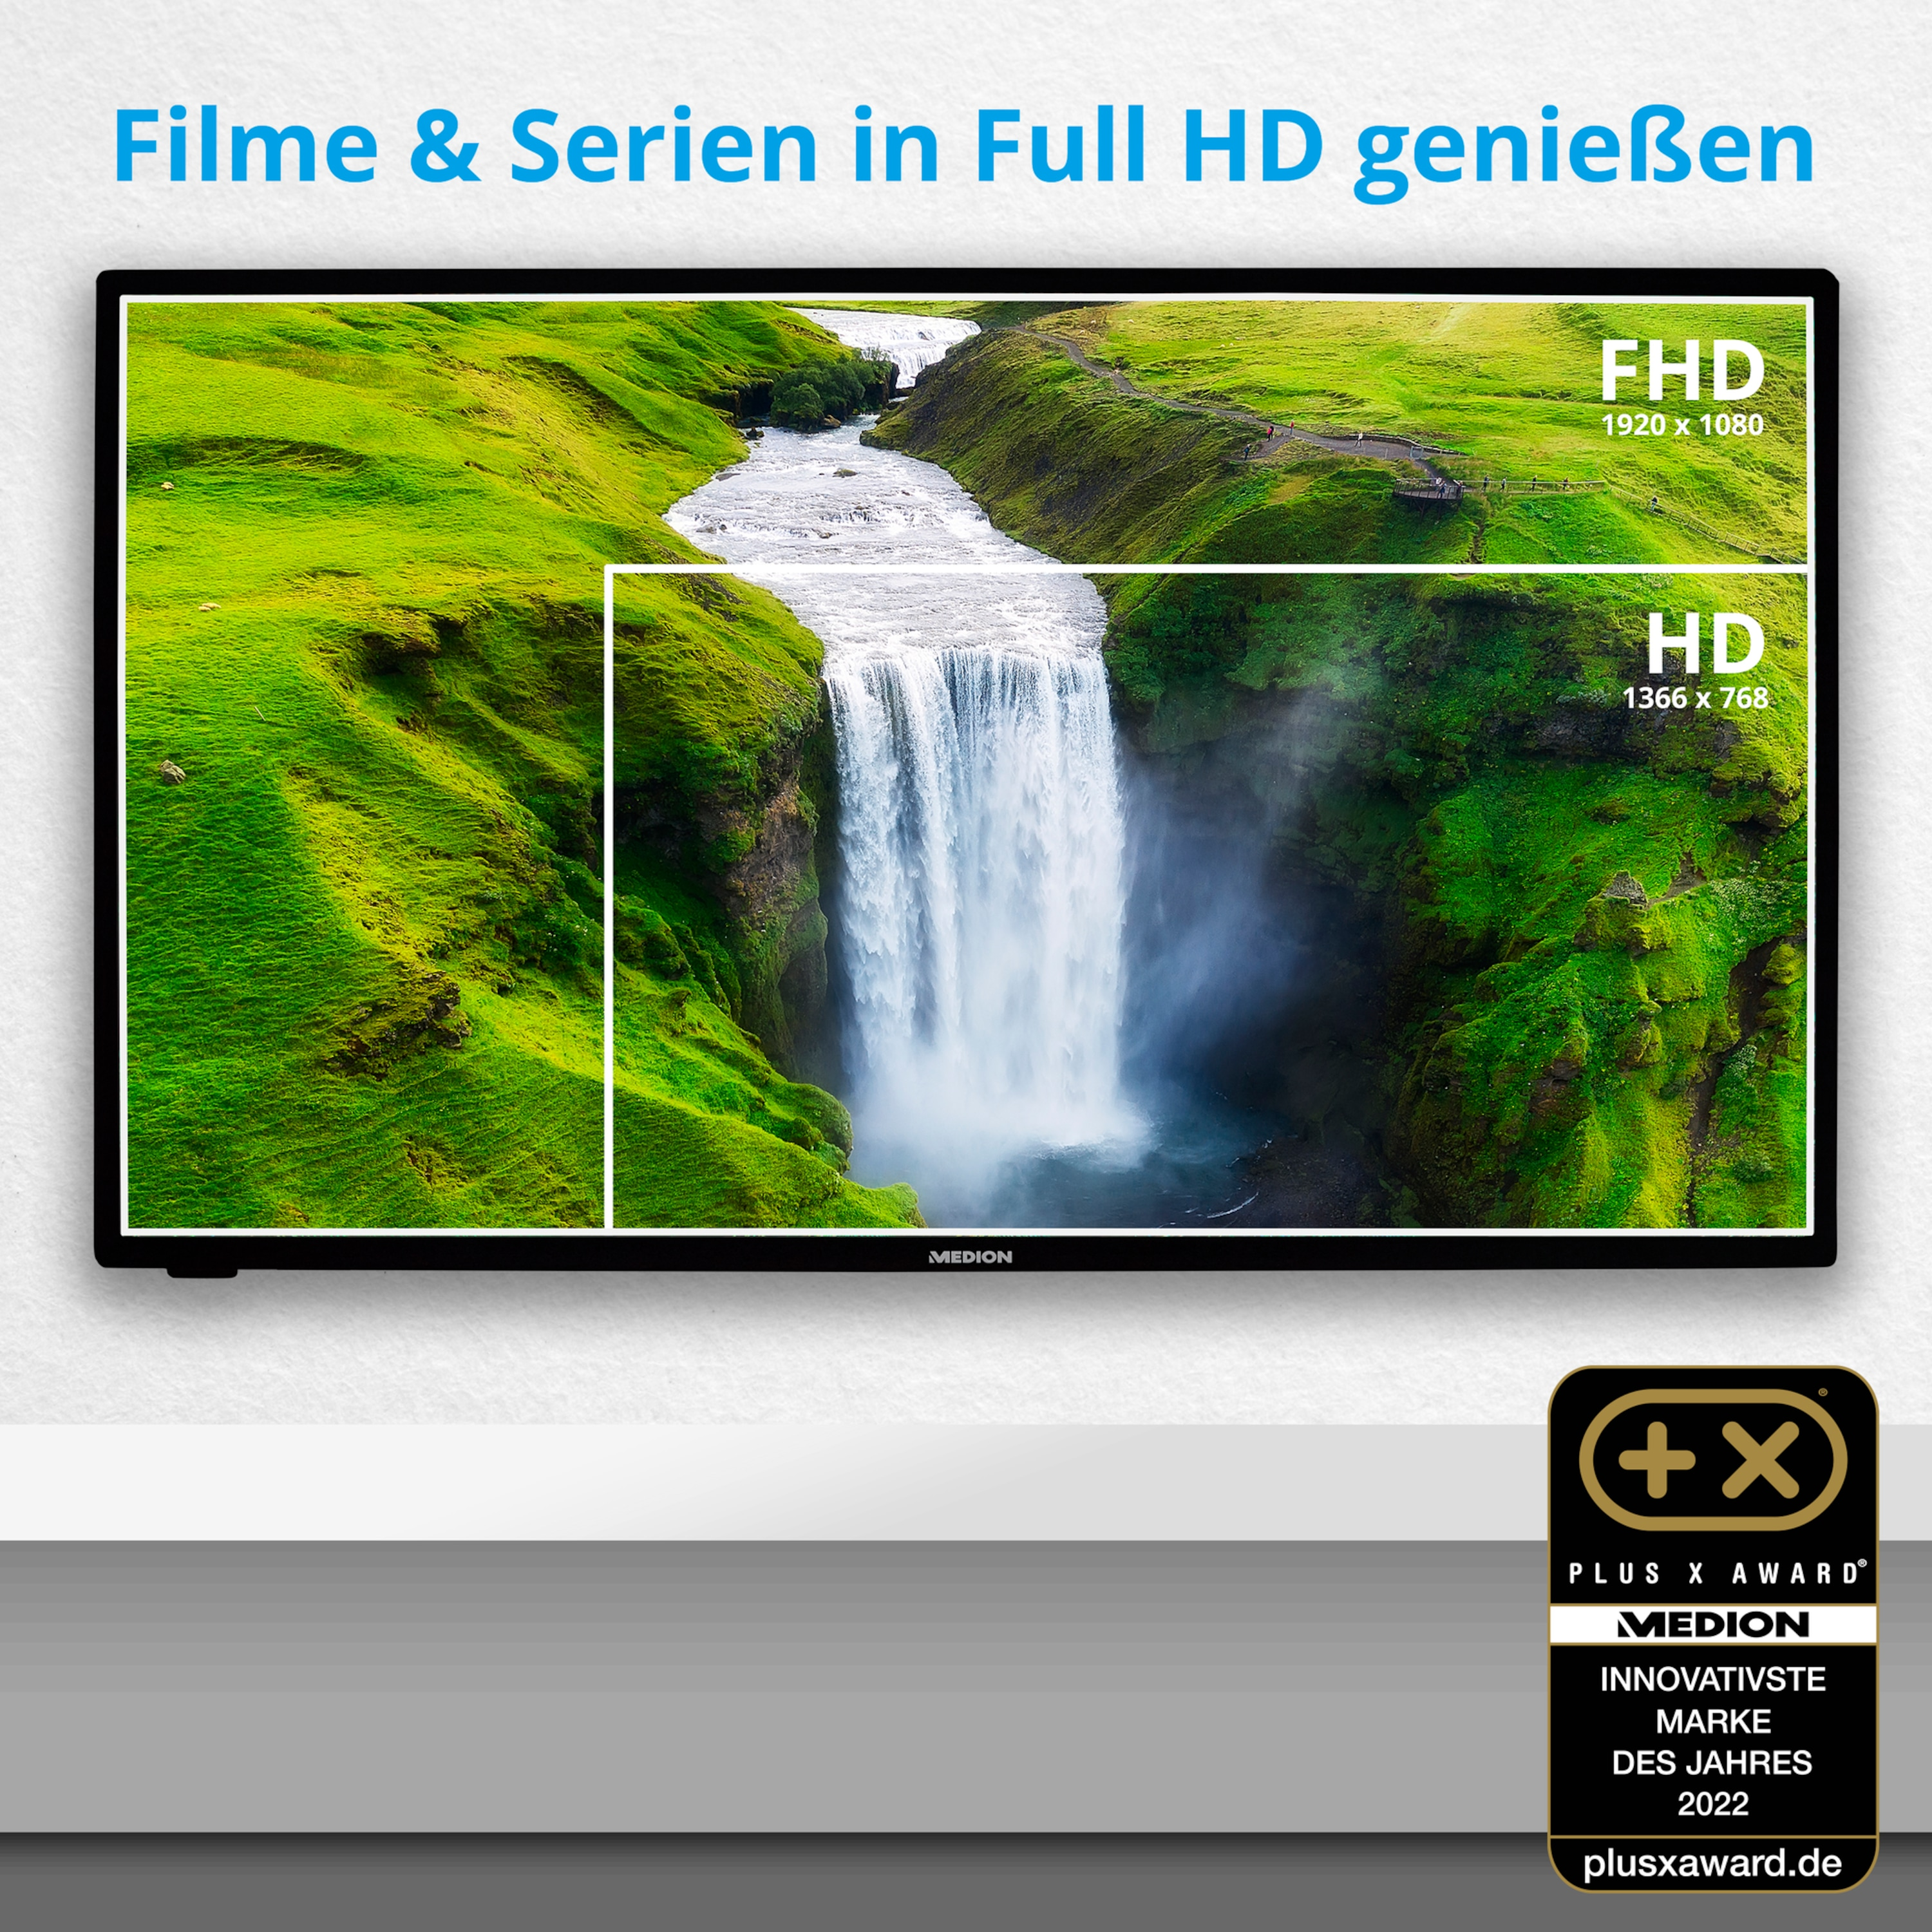 MEDION P14093 Full HD Fernseher HDR / Android) cm, Zoll, 40 Smart 100,3 TV (Flat, Fernseher 39,5 cm, Netflix Zoll HD, mit Android 100,3 TV